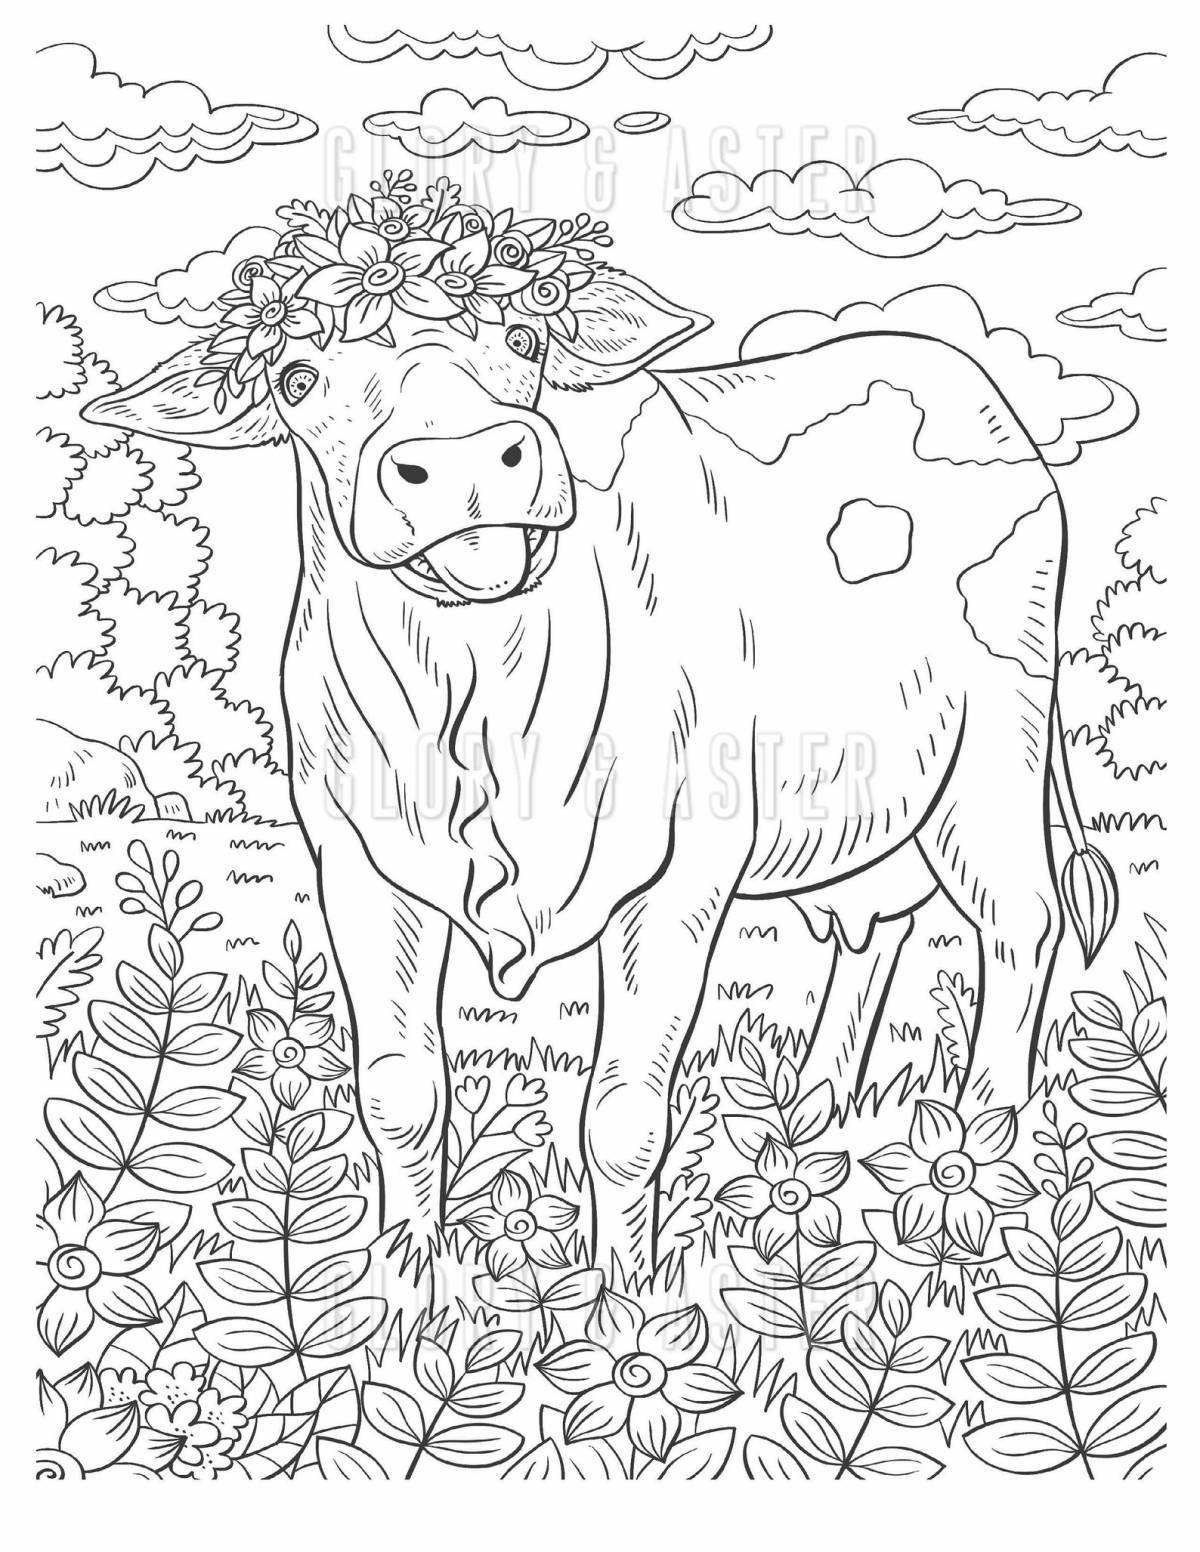 Fairy cow coloring page